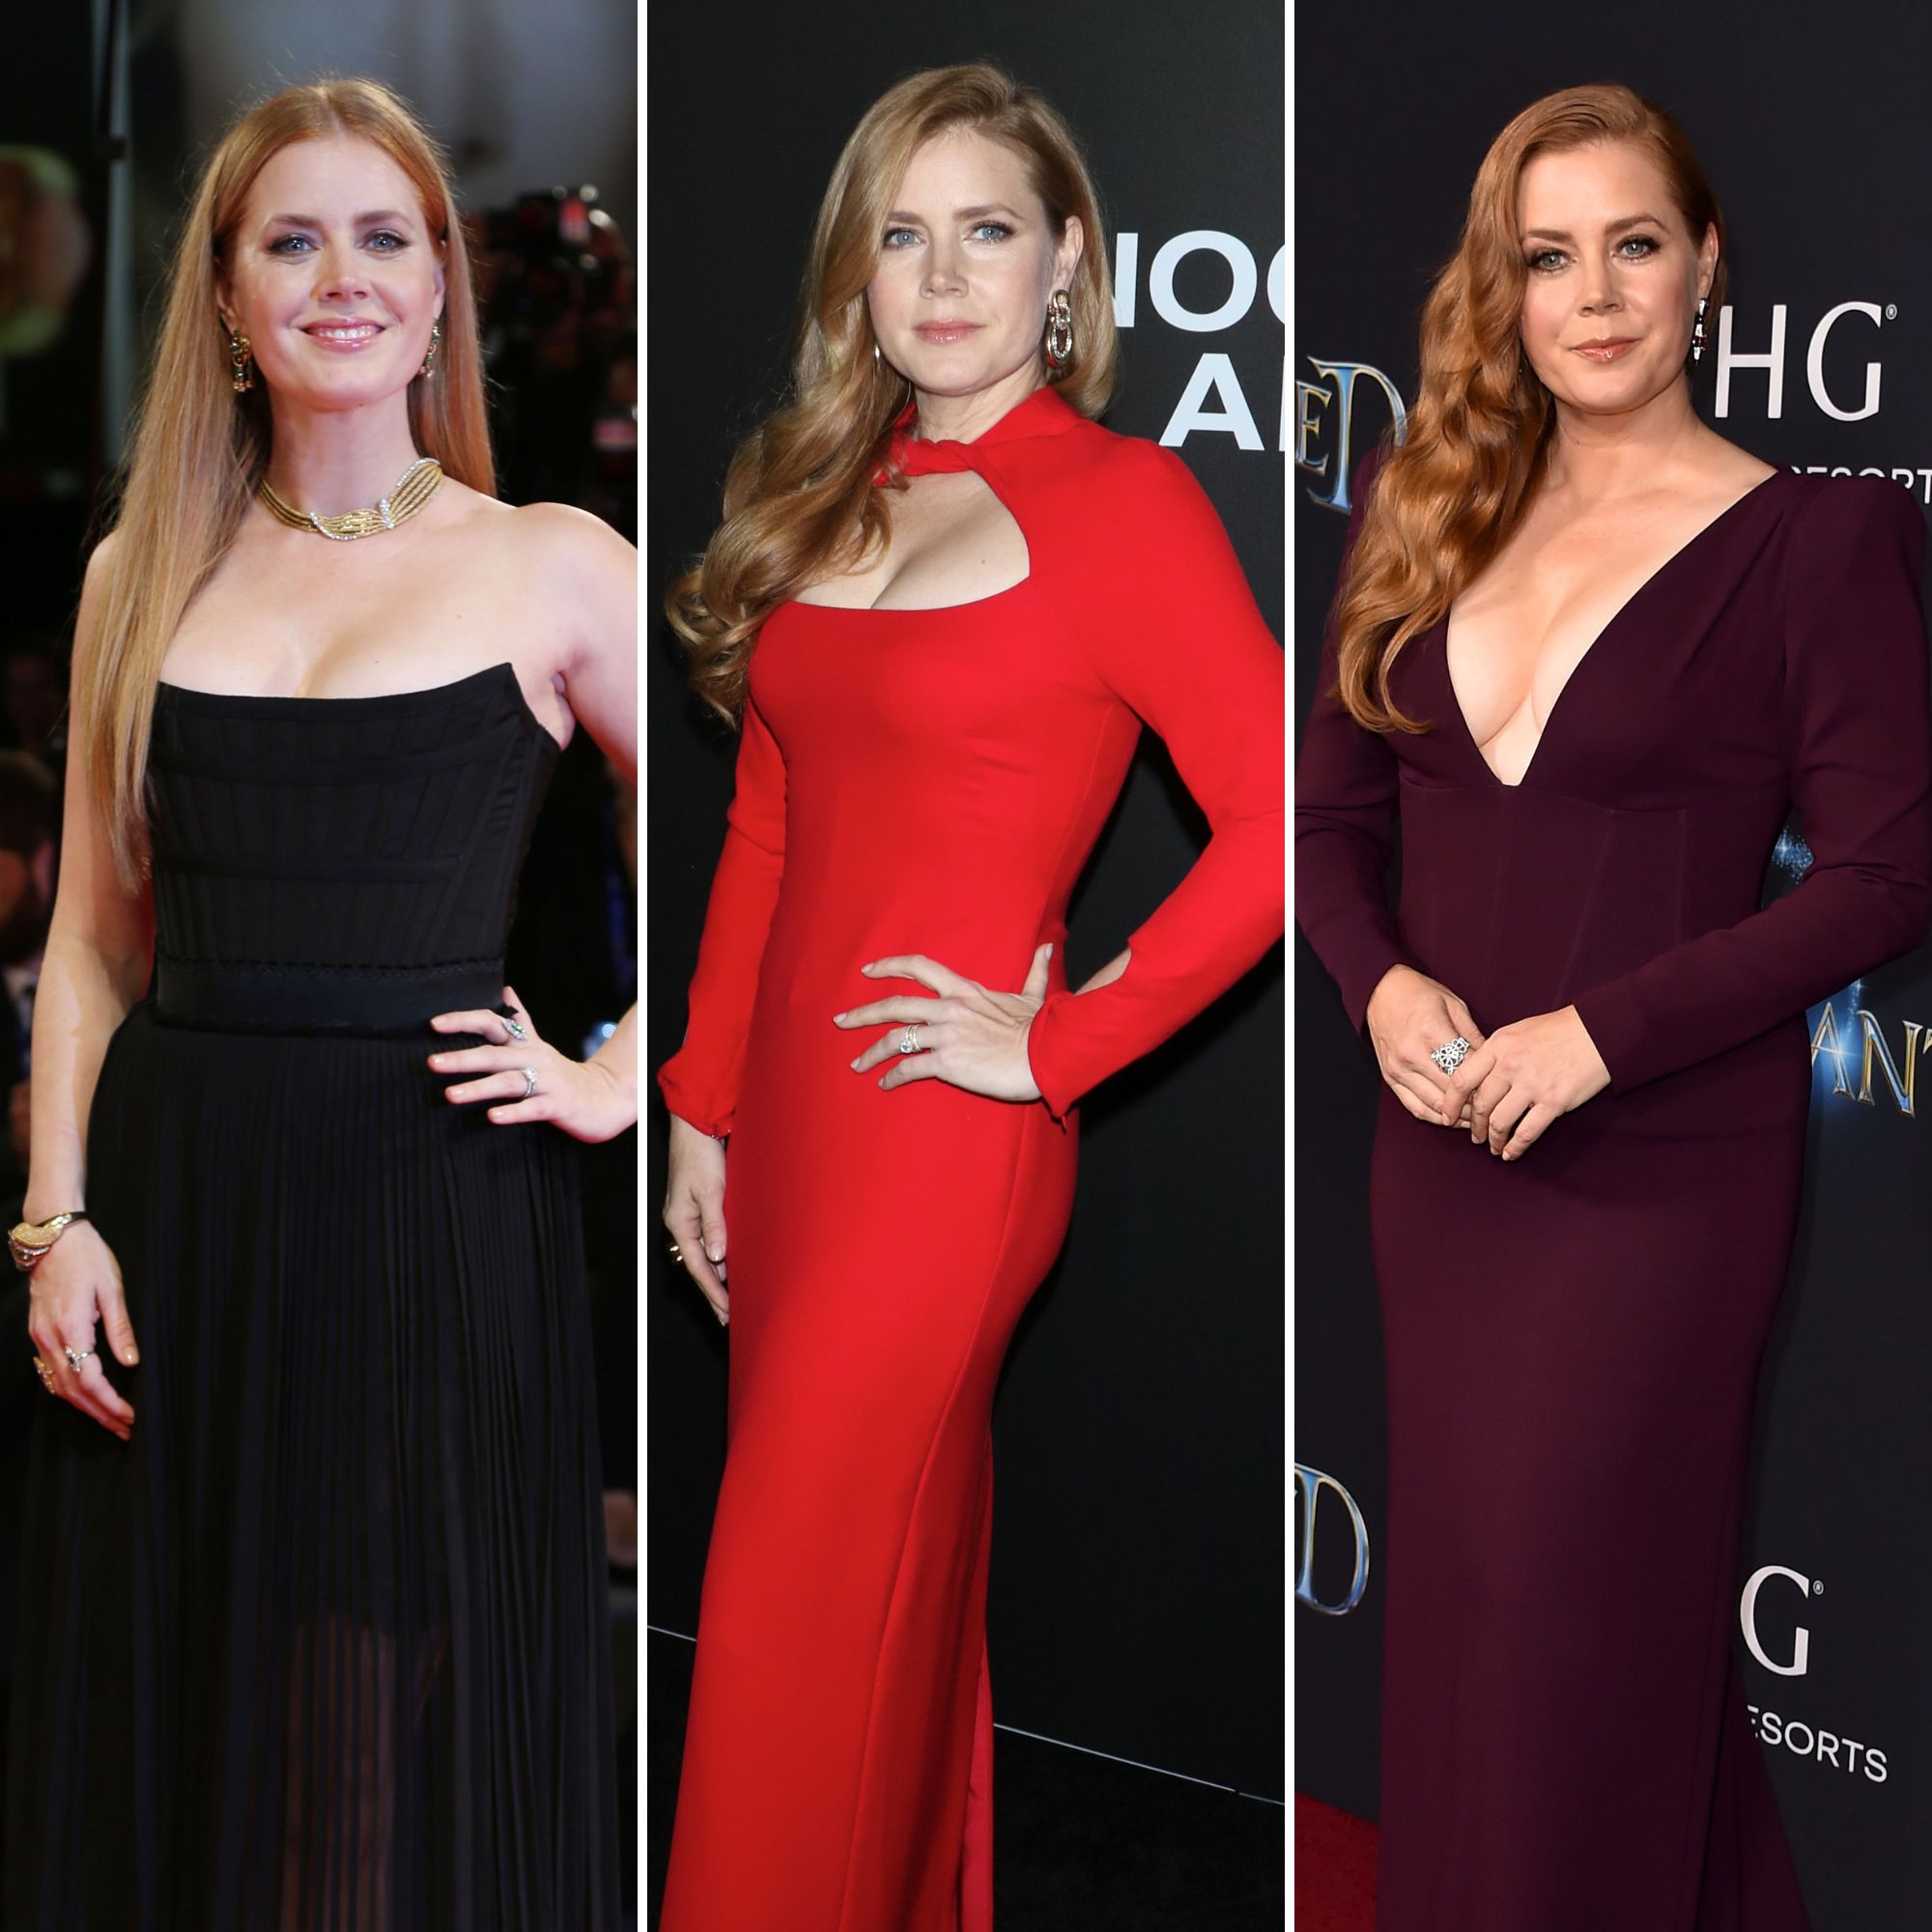 azis susanto recommends Amy Adams Maked